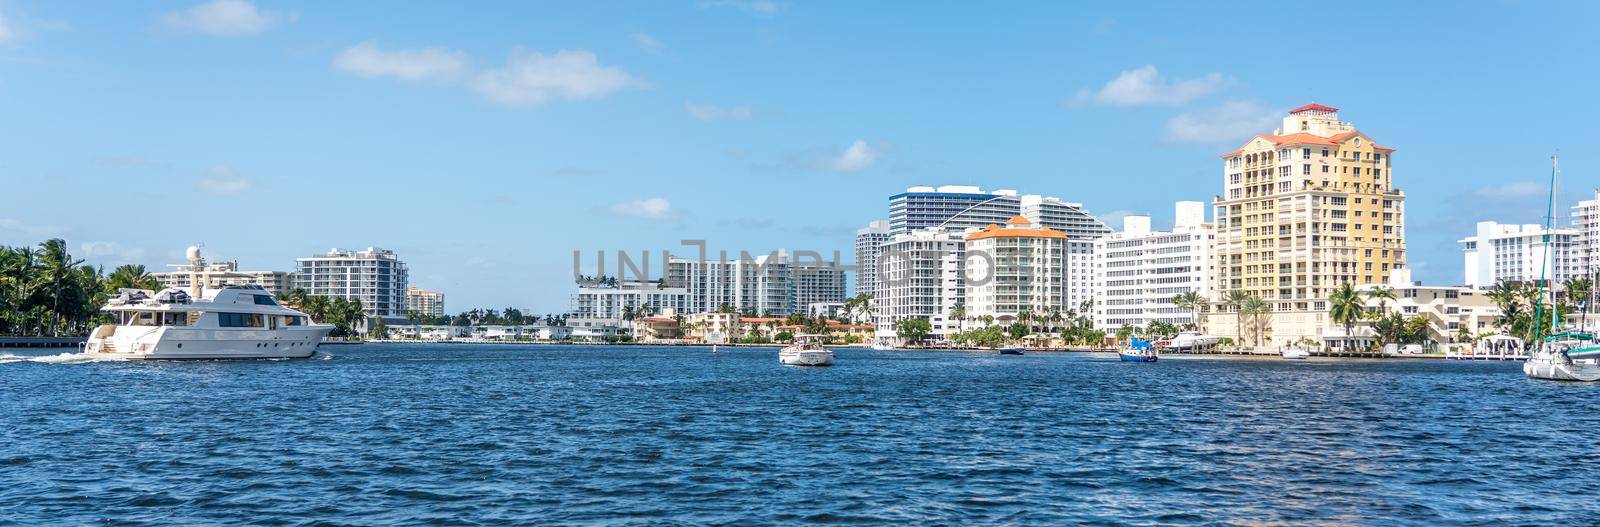 FORT LAUDERDALE, FLORIDA - September 20, 2019: Panorama of skyline of Fort Lauderdale from the canal by Mariakray